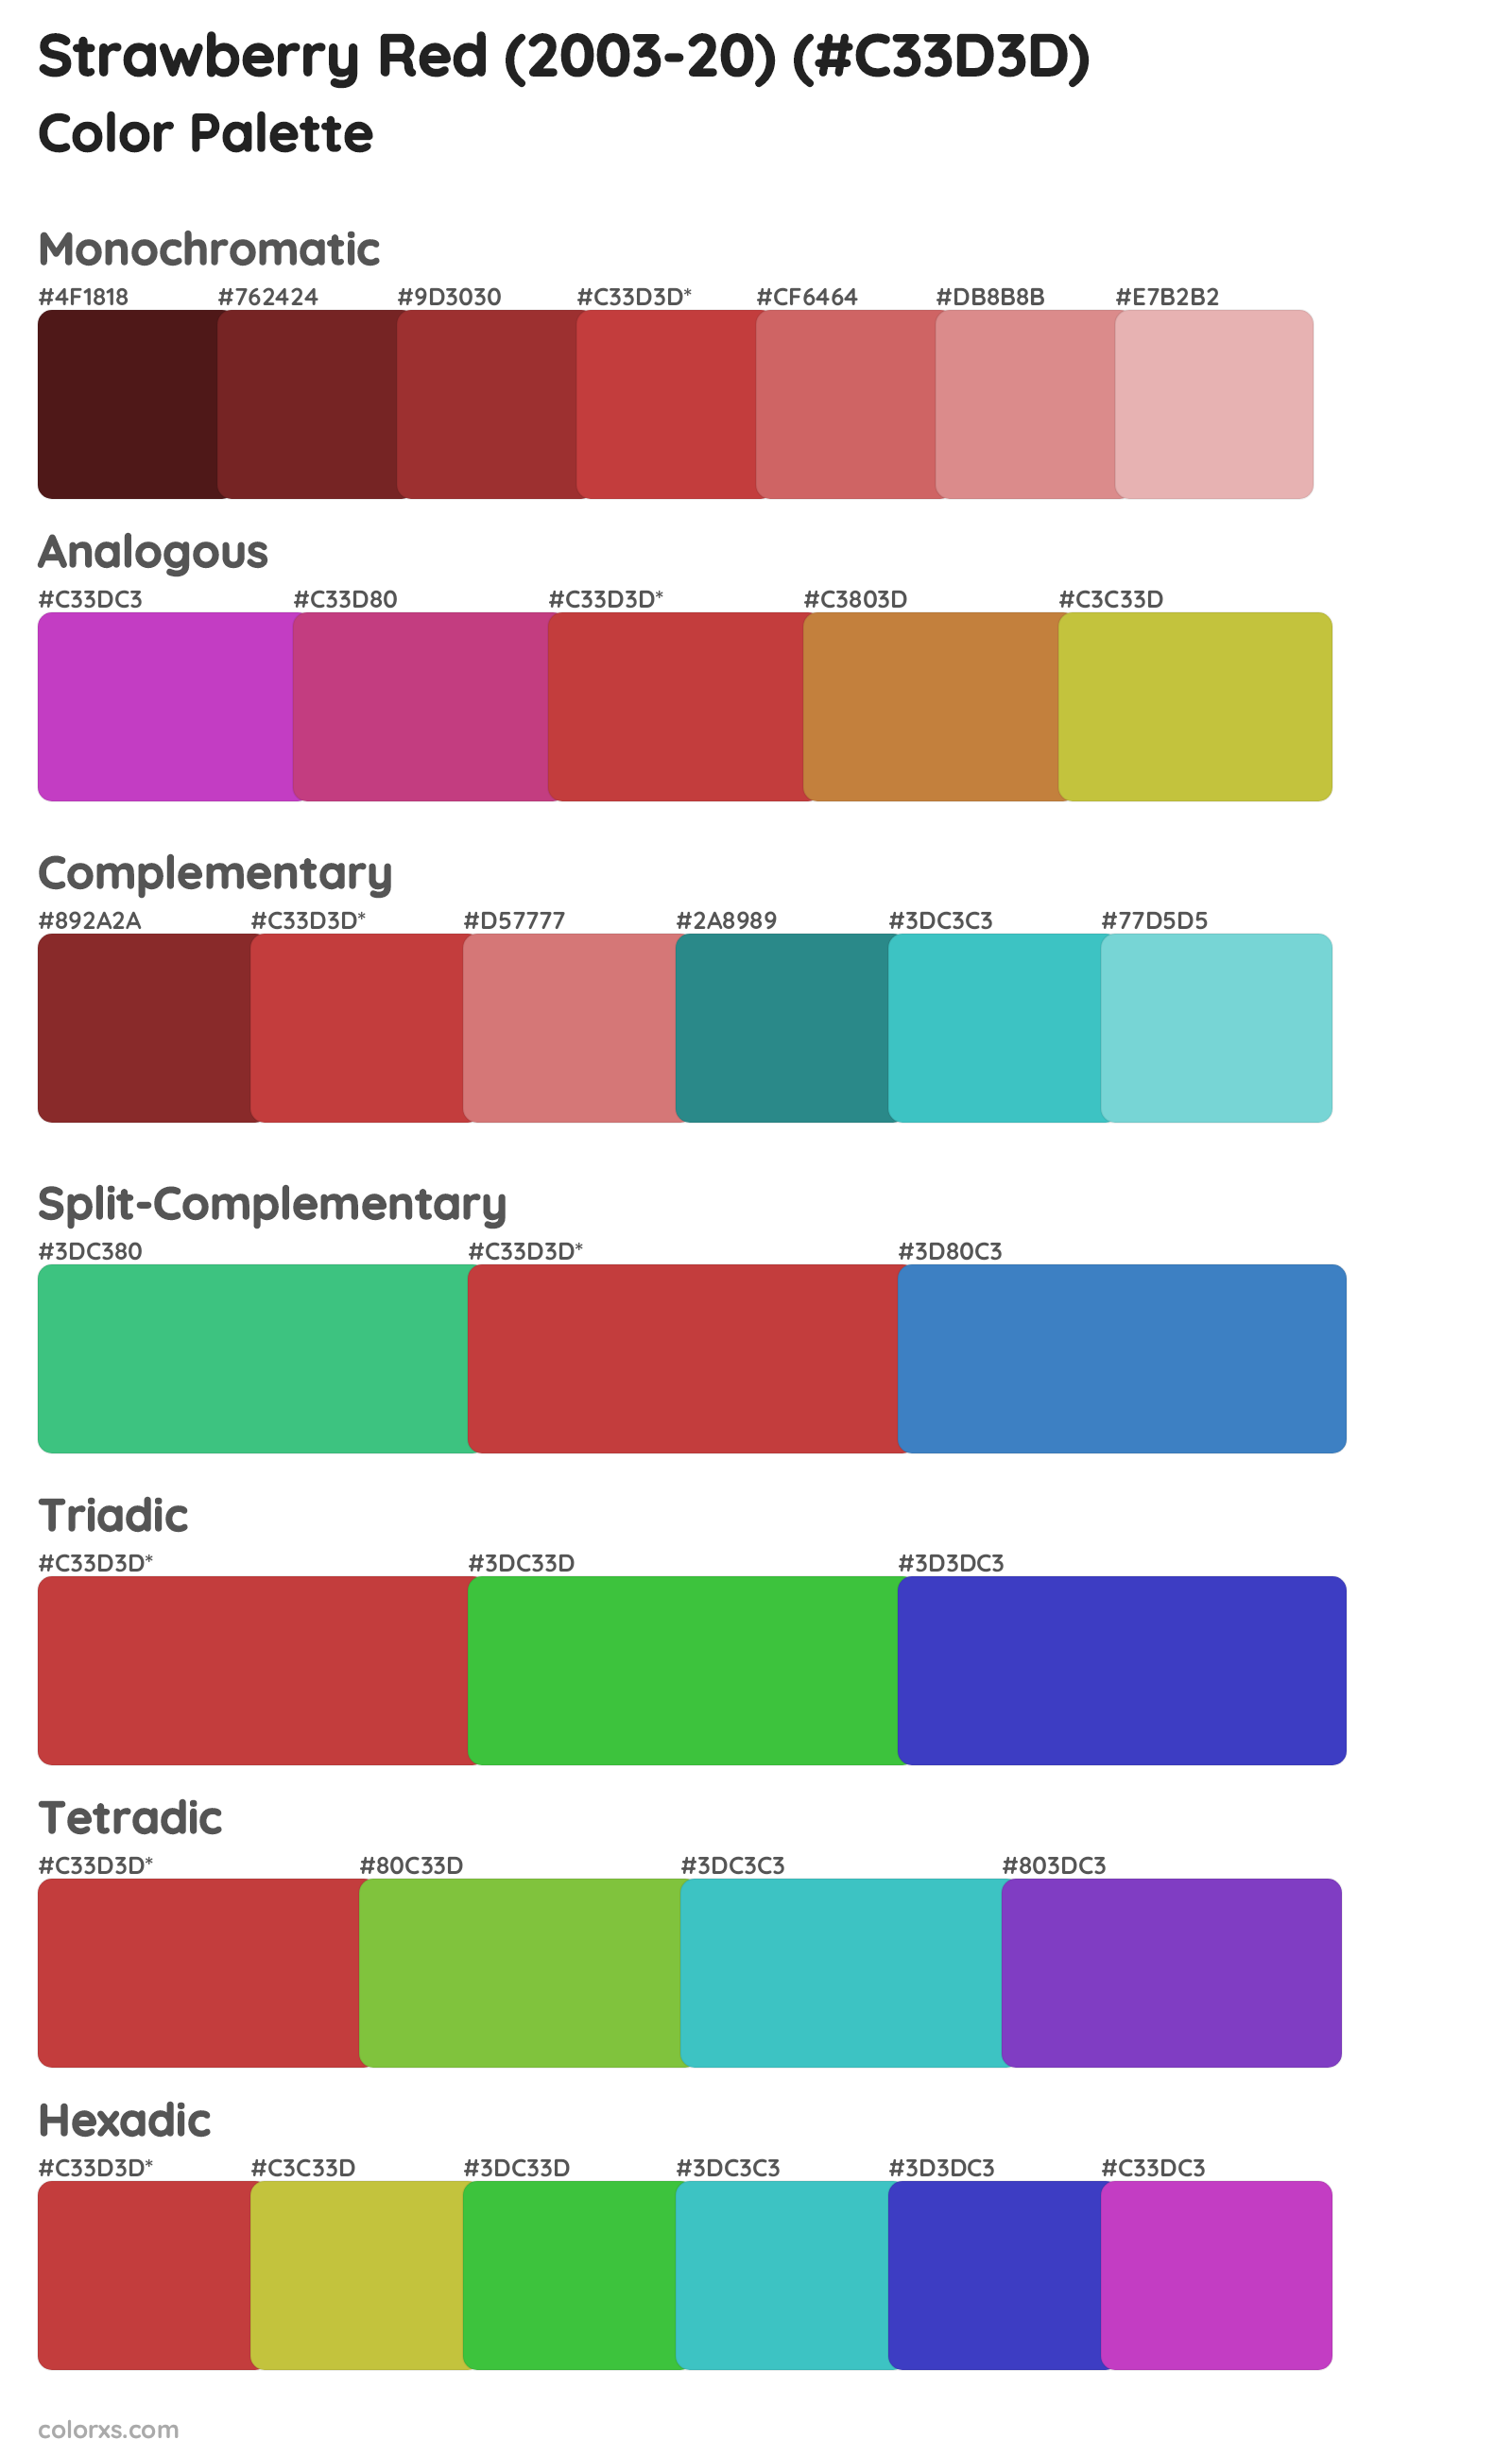 Strawberry Red (2003-20) Color Scheme Palettes